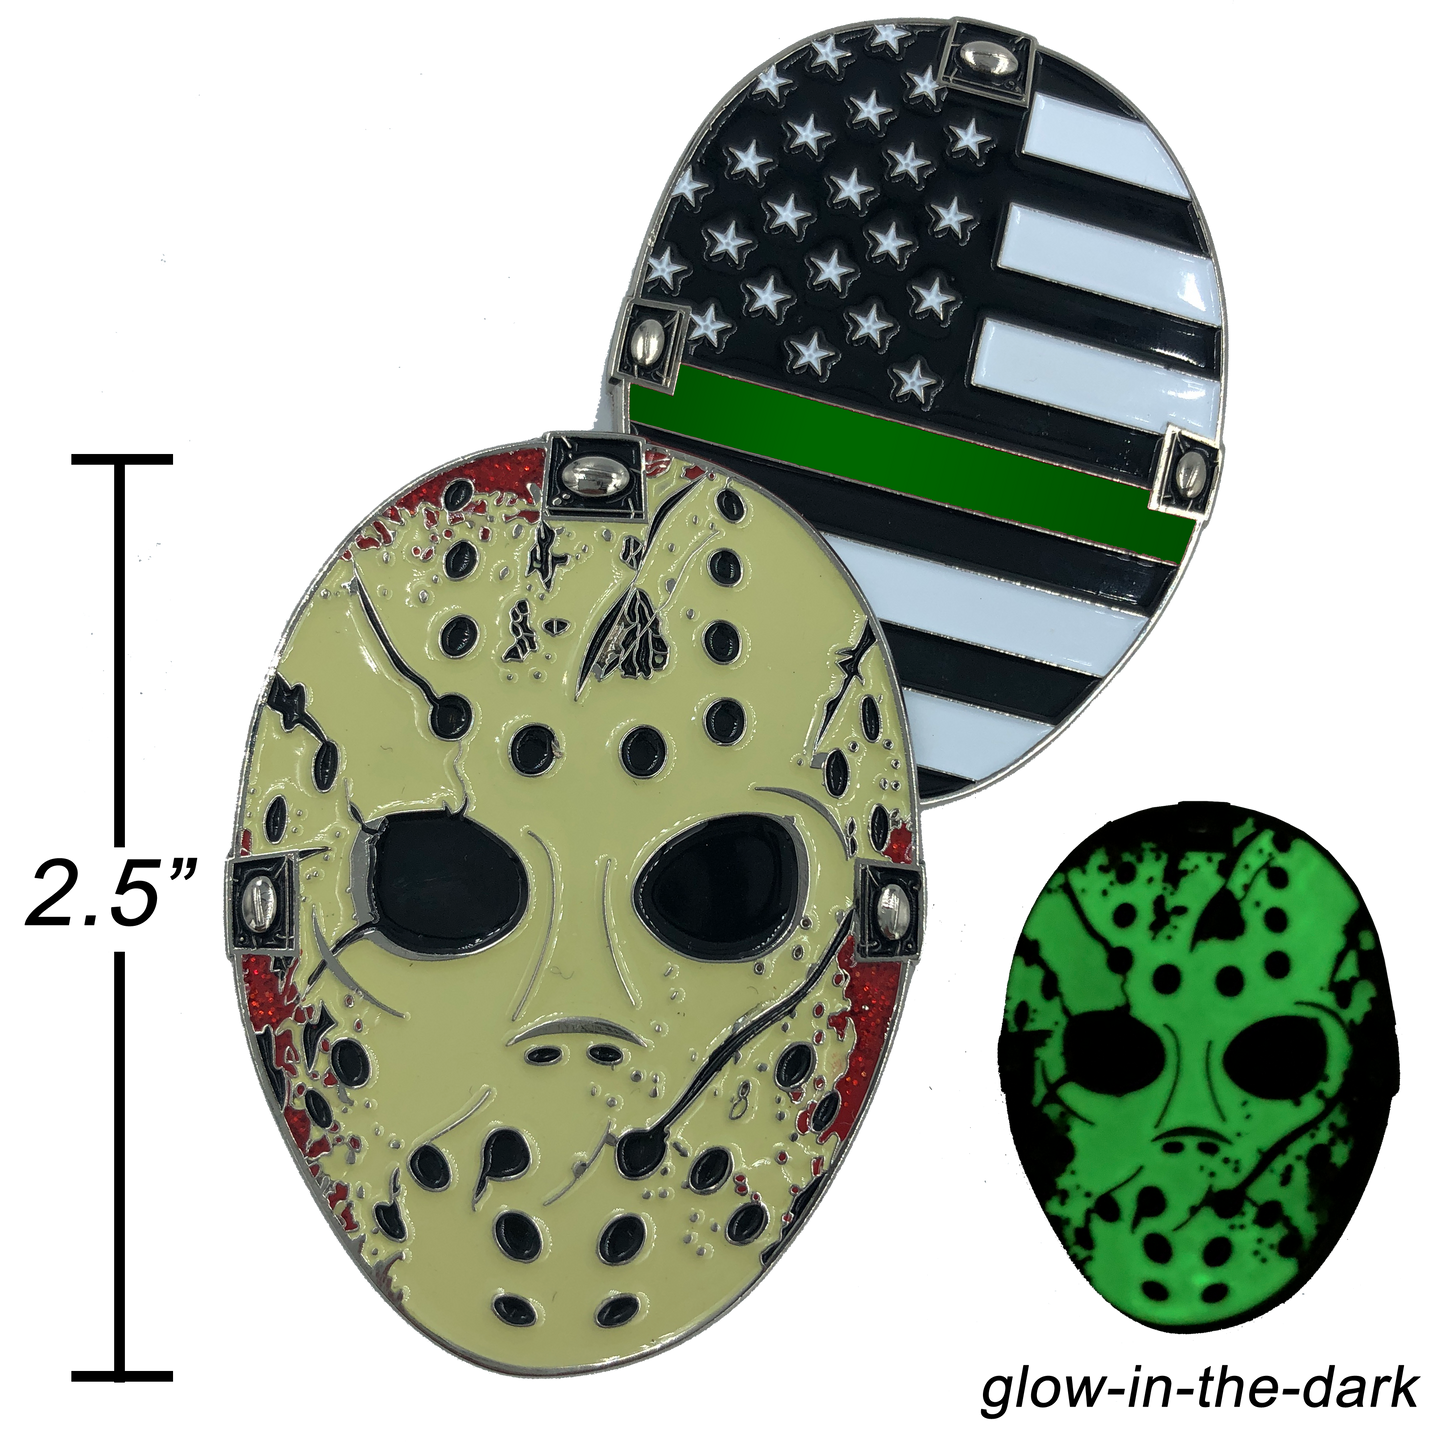 A-009 Thin Green Line Jason Voorhees Goalie Mask Friday the 13th Sheriff Border Patrol CBP